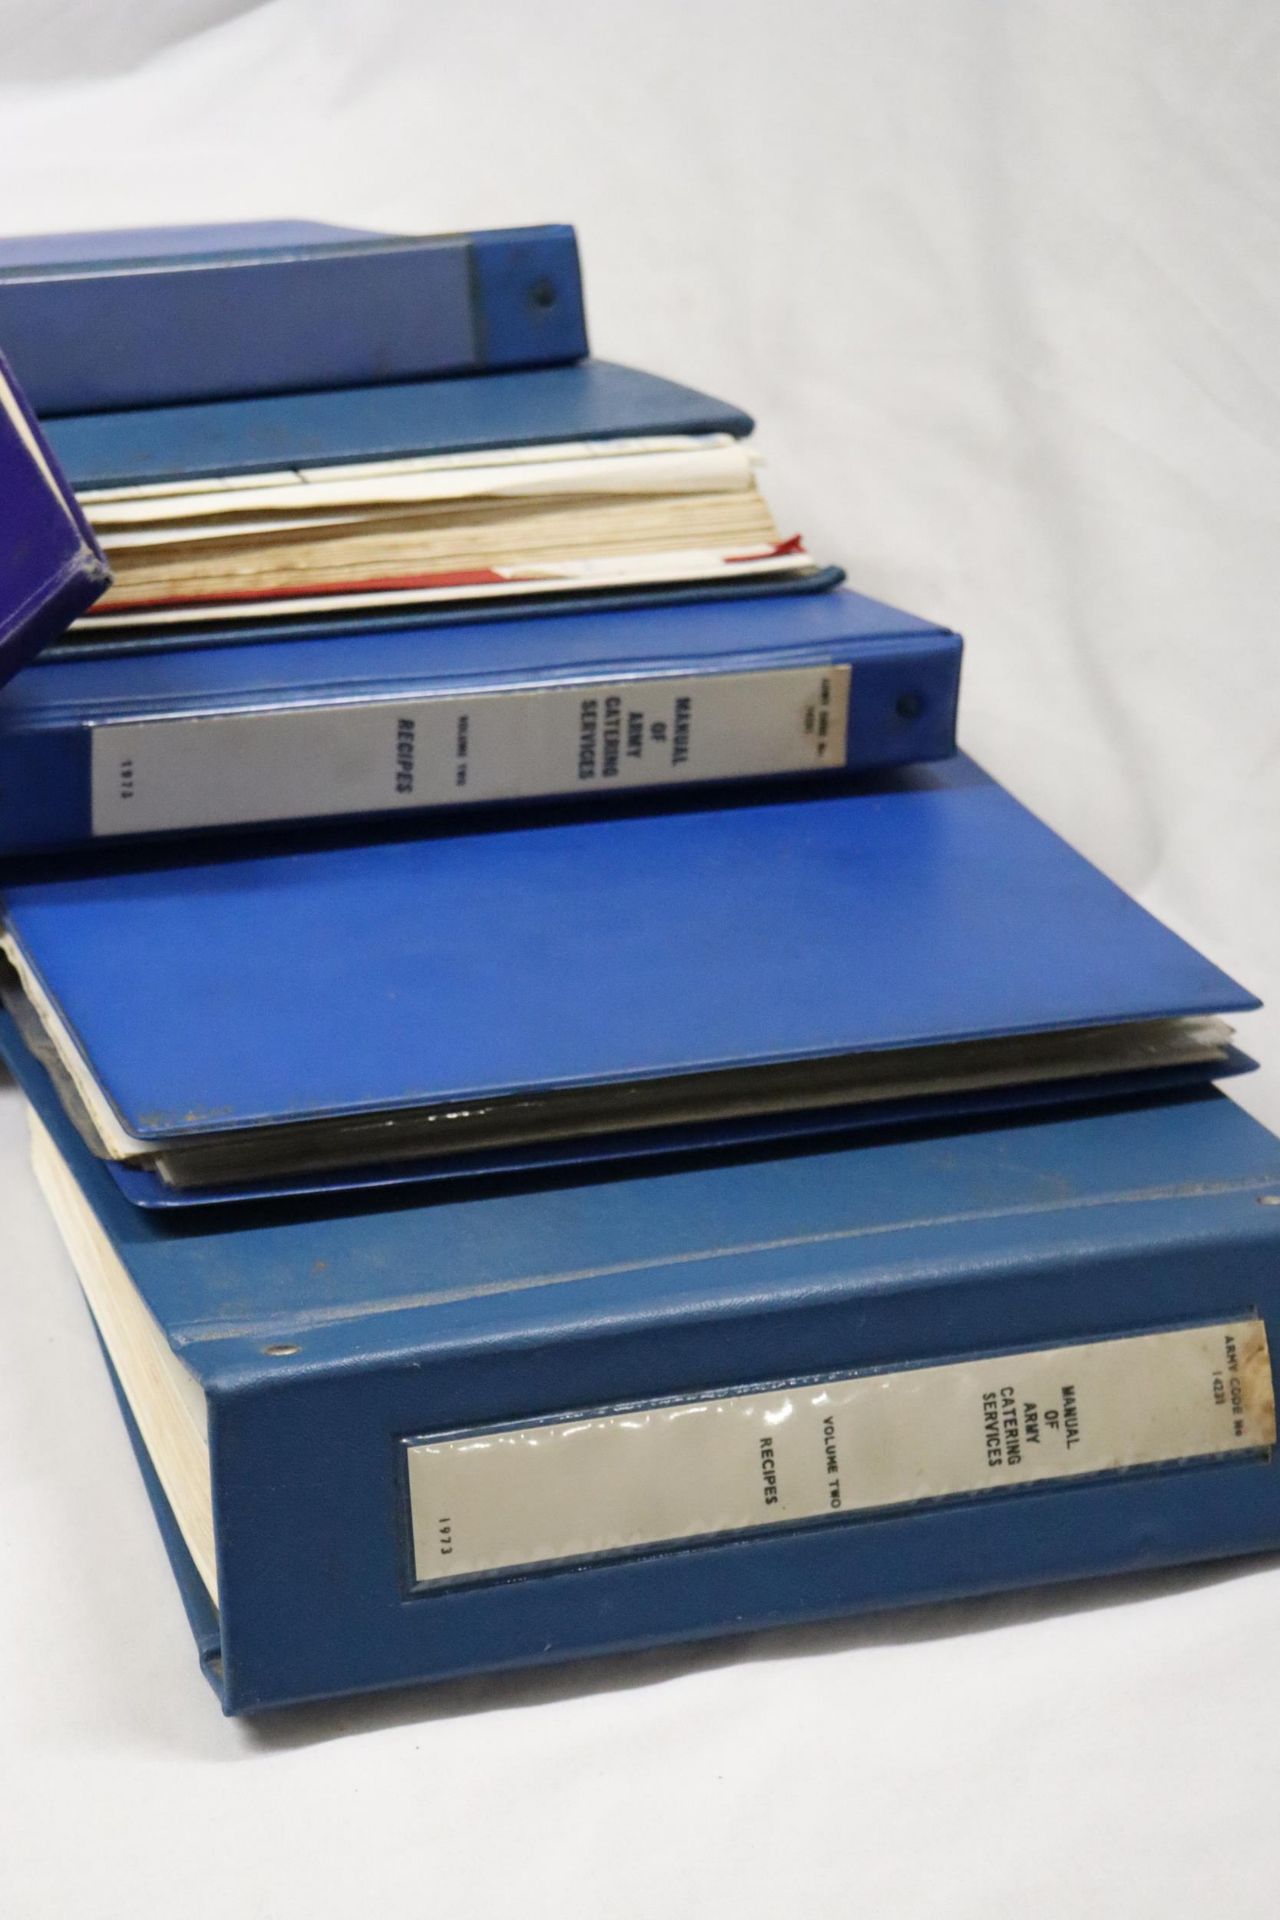 A FIVE VOLUME COLLECTION HOUSED IN BLUE BINDERS